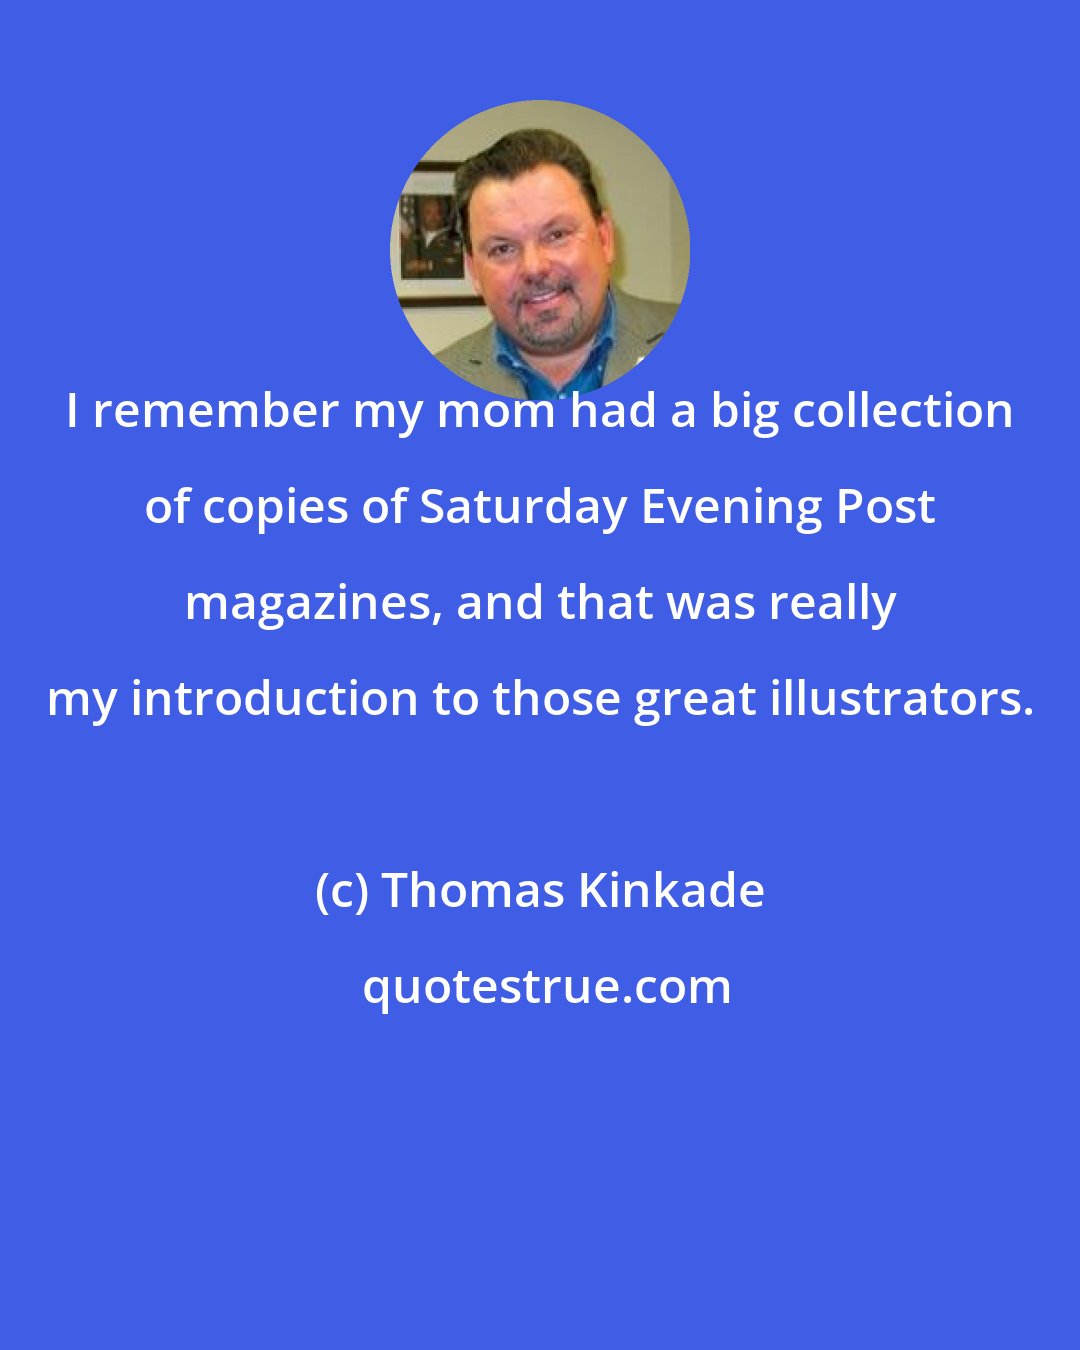 Thomas Kinkade: I remember my mom had a big collection of copies of Saturday Evening Post magazines, and that was really my introduction to those great illustrators.